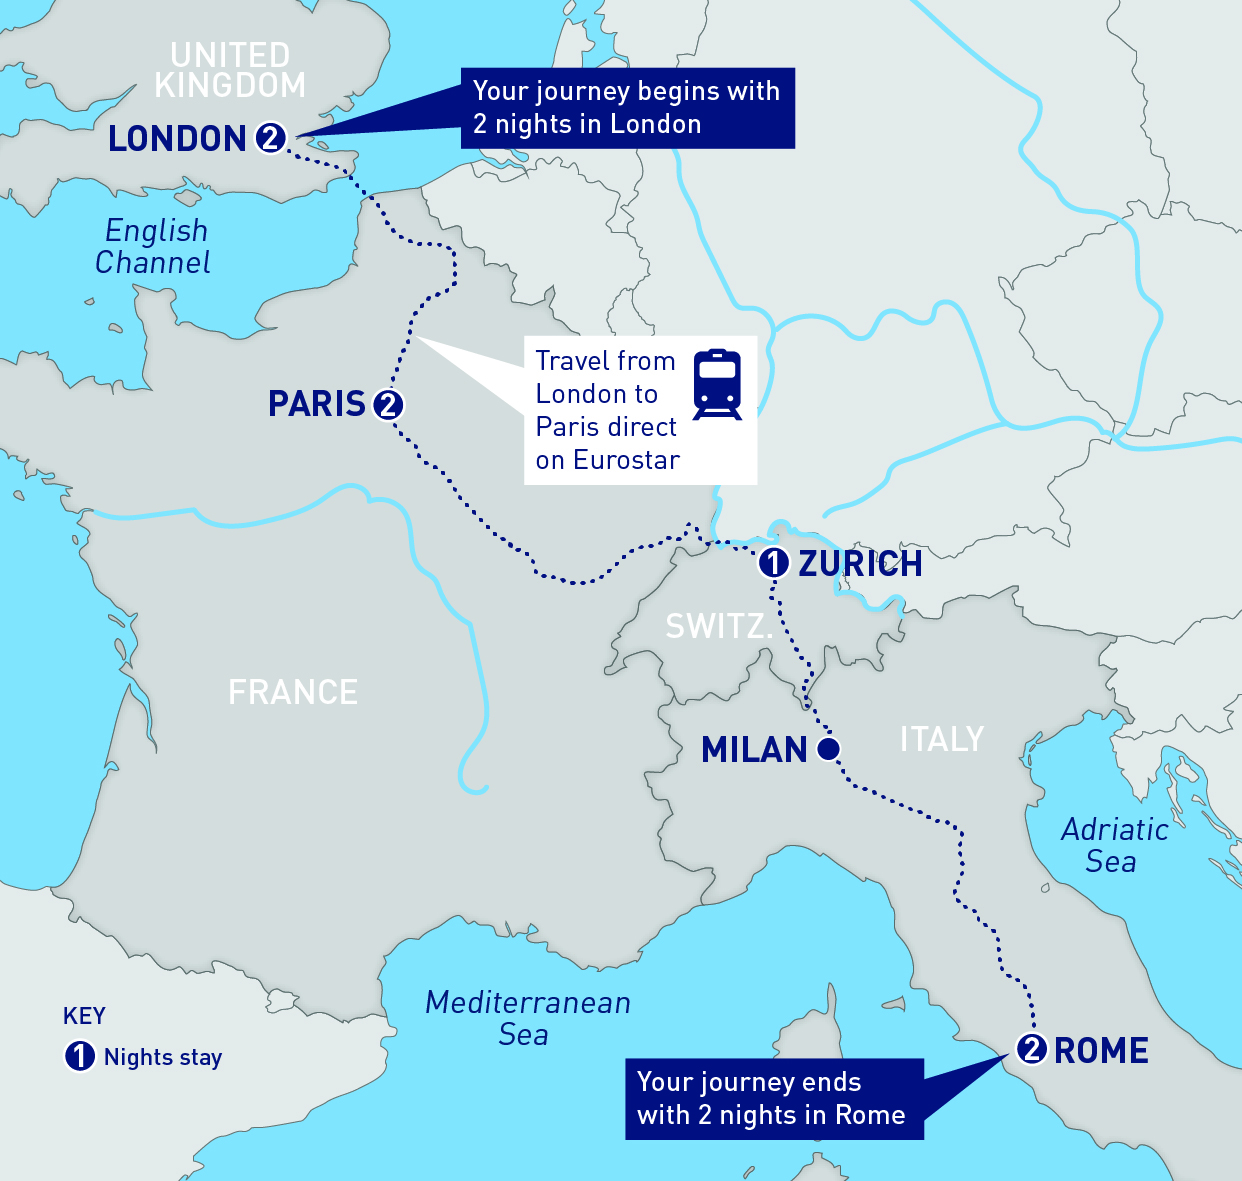 itinerary mapped out from zurich to rome, to paris and london.